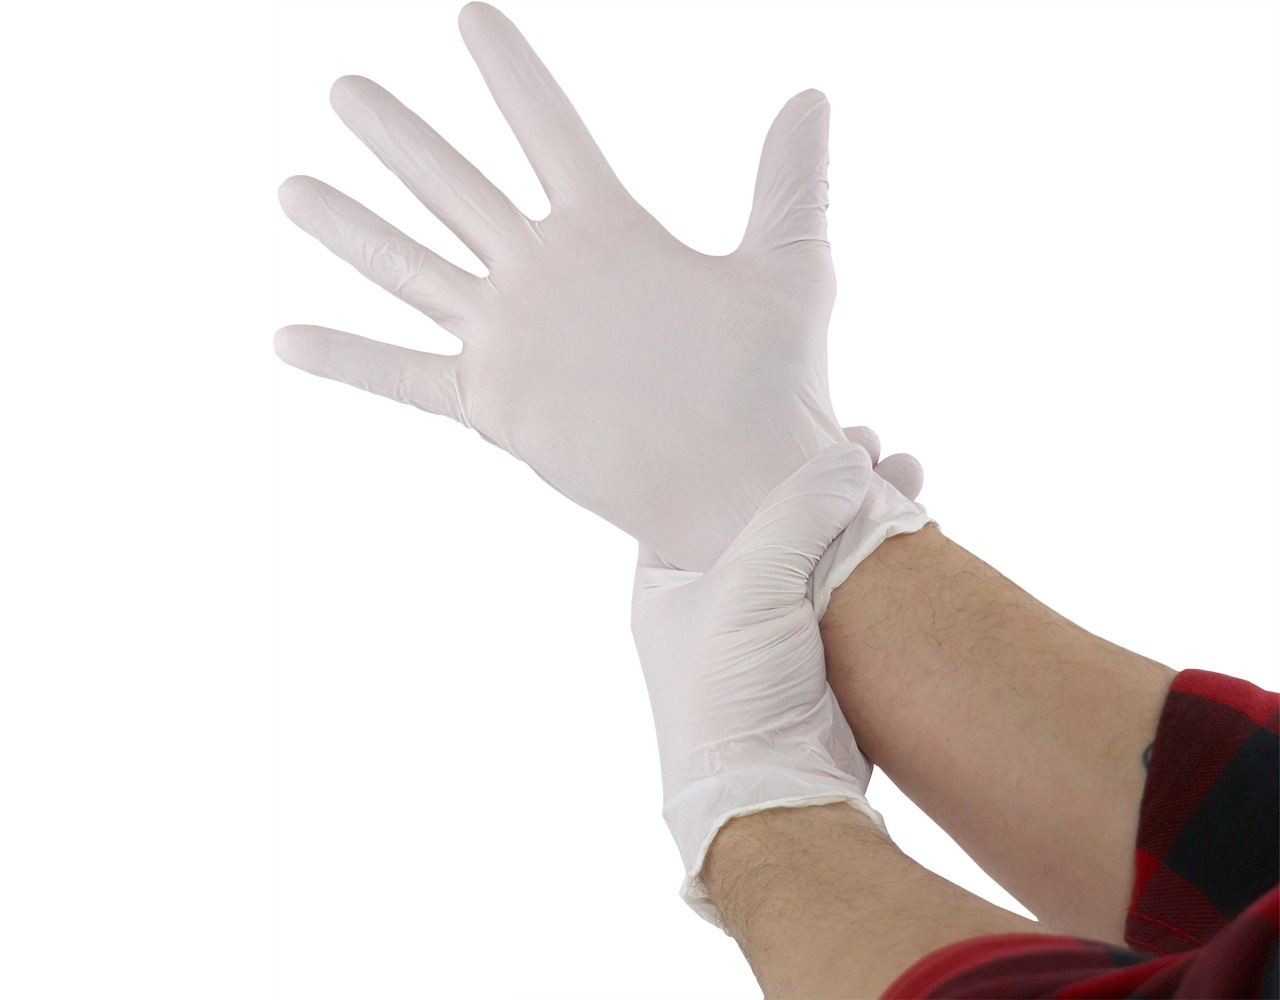 Picture for Mad Farmer White Nitrile Gloves, Size S, Box of 100